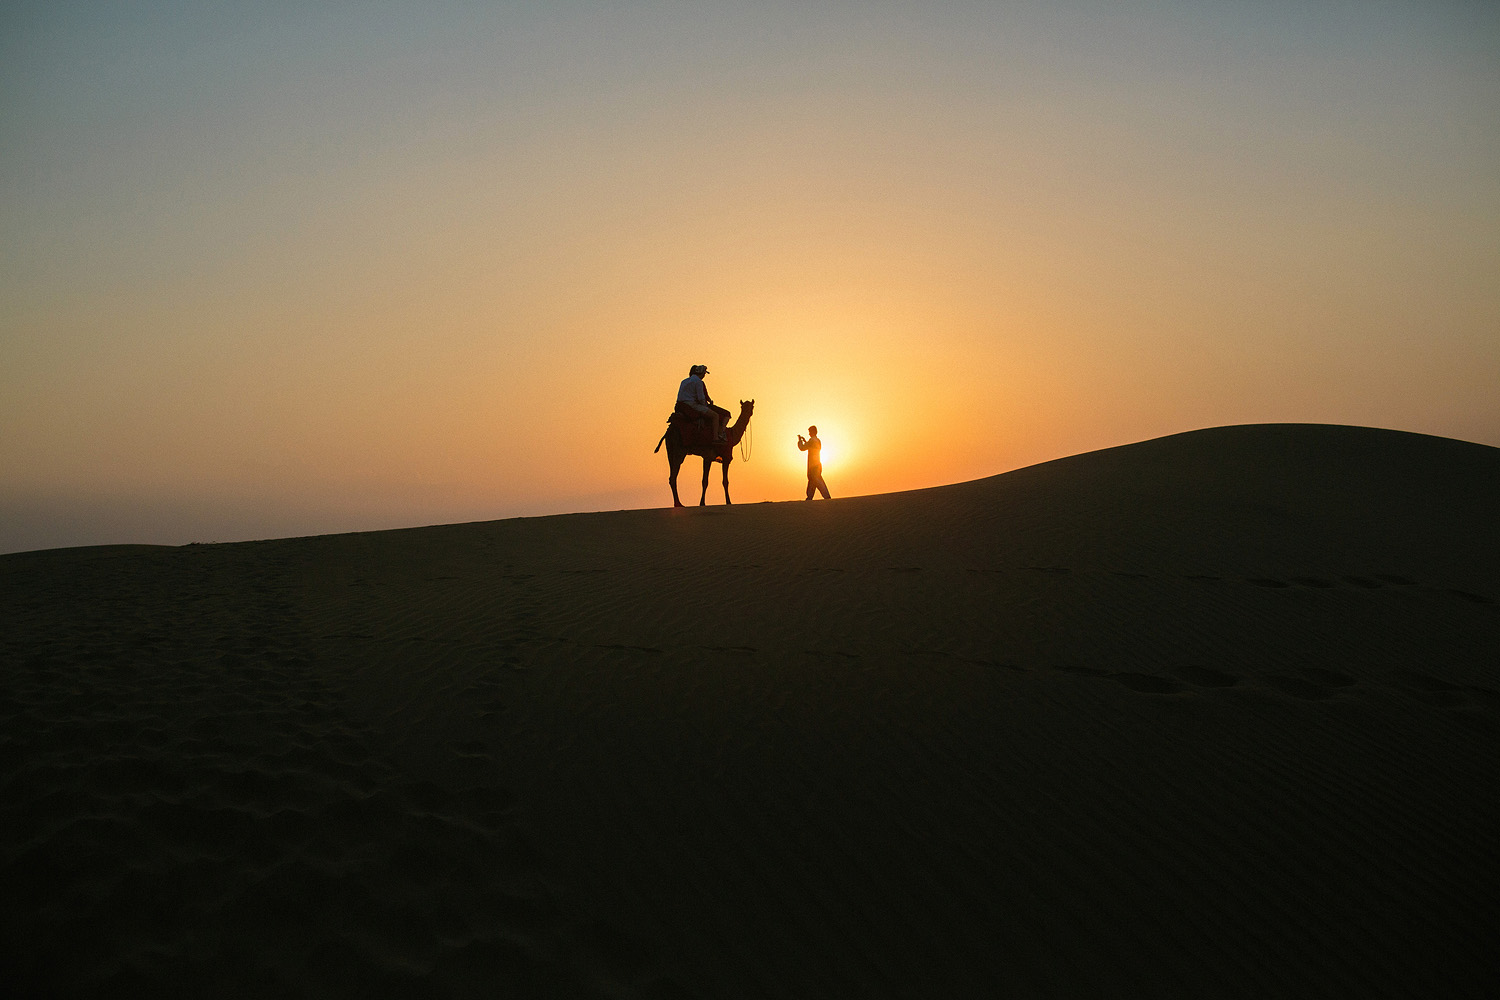 Sunset at Lalhmana Sand Dunes in India